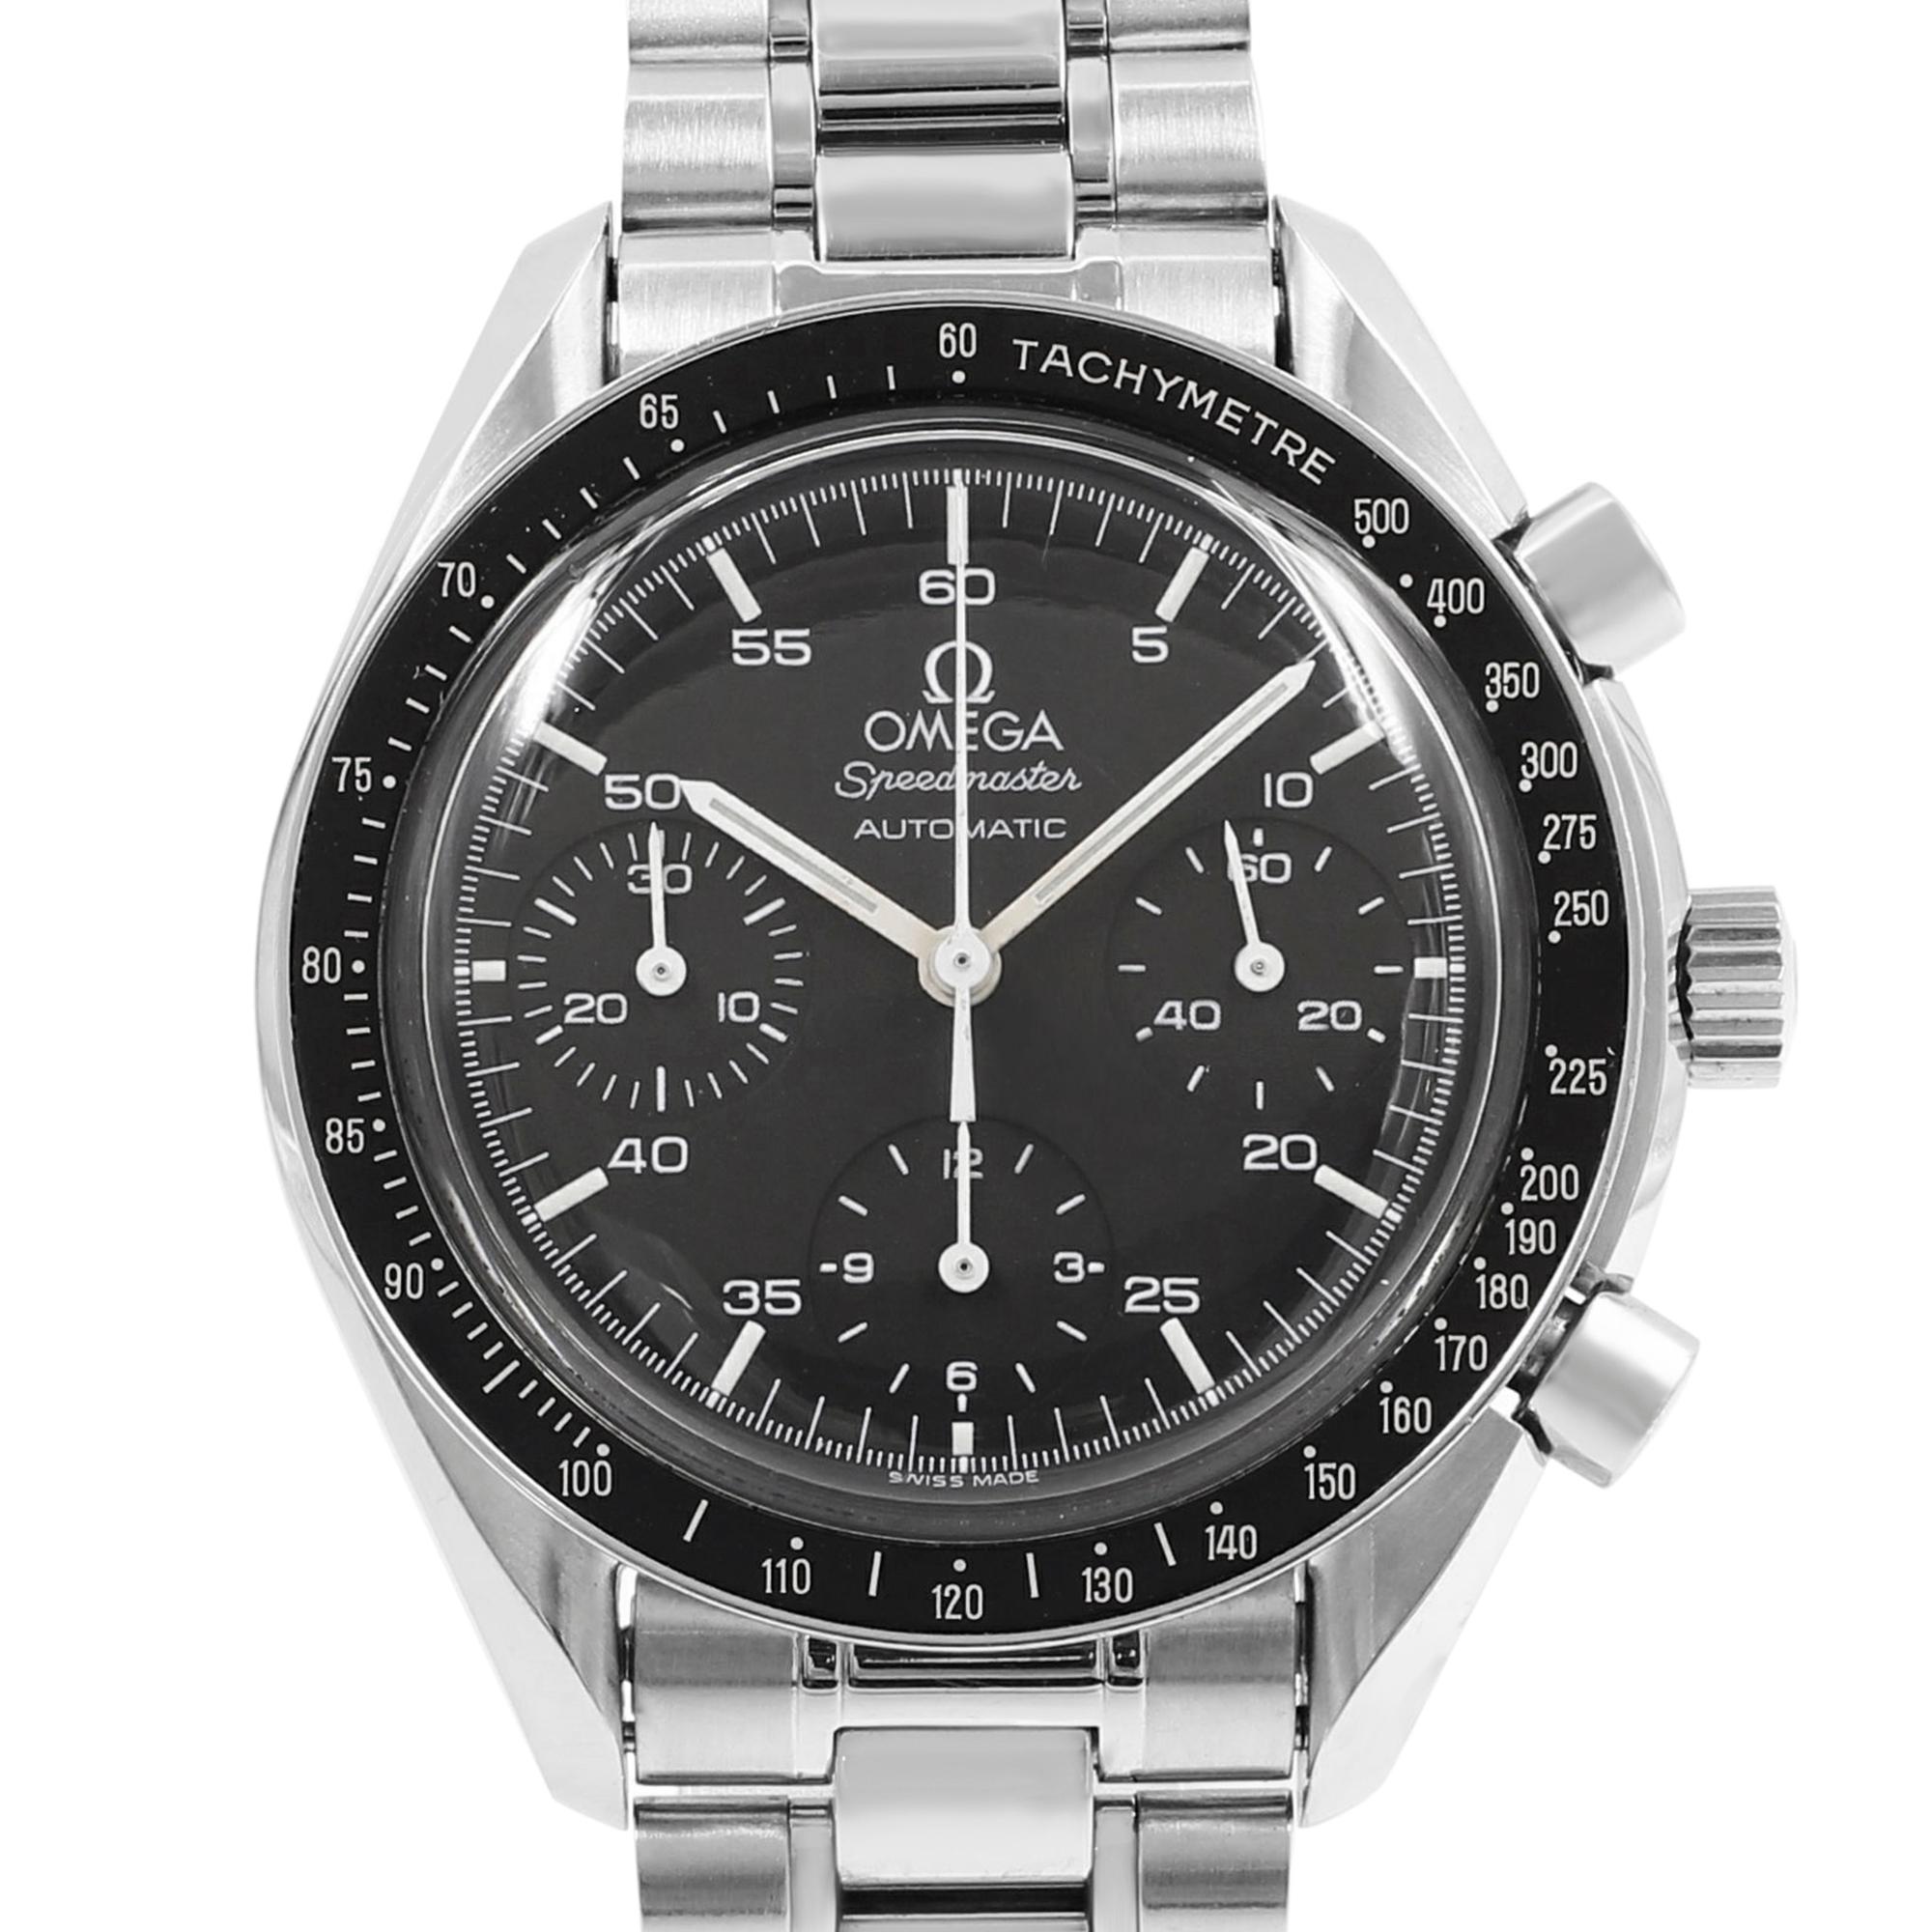 This pre-owned Omega Speedmaster  3510.50.00 is a beautiful men's timepiece that is powered by mechanical (automatic) movement which is cased in a stainless steel case. It has a round shape face, chronograph, small seconds subdial, tachymeter dial